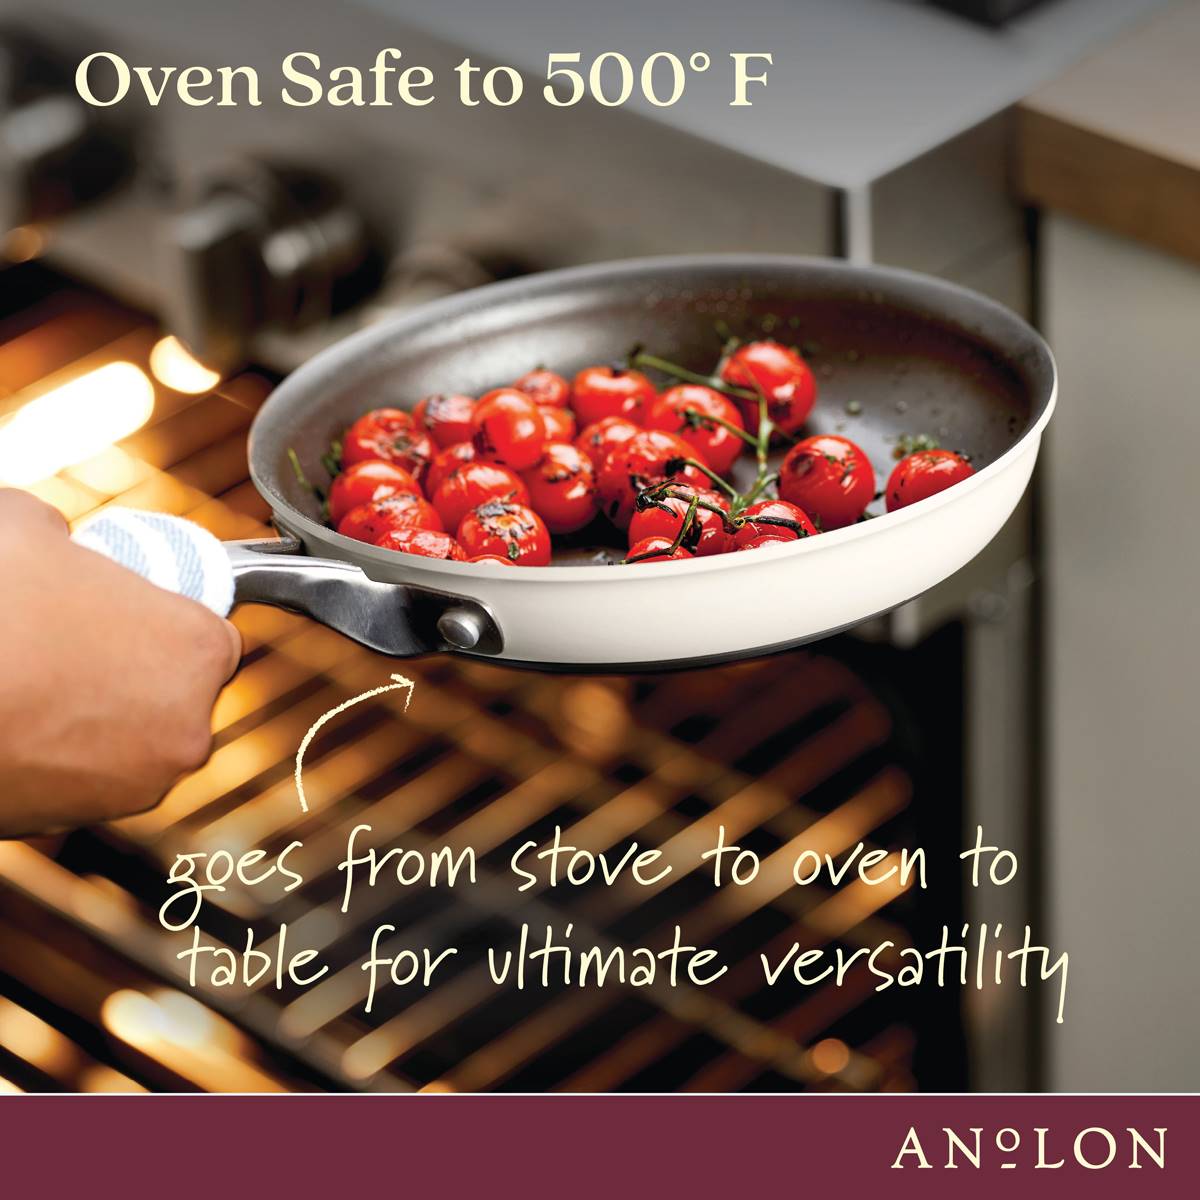 Anolon(R) Achieve Hard Anodized Nonstick 8.25in. Frying Pan